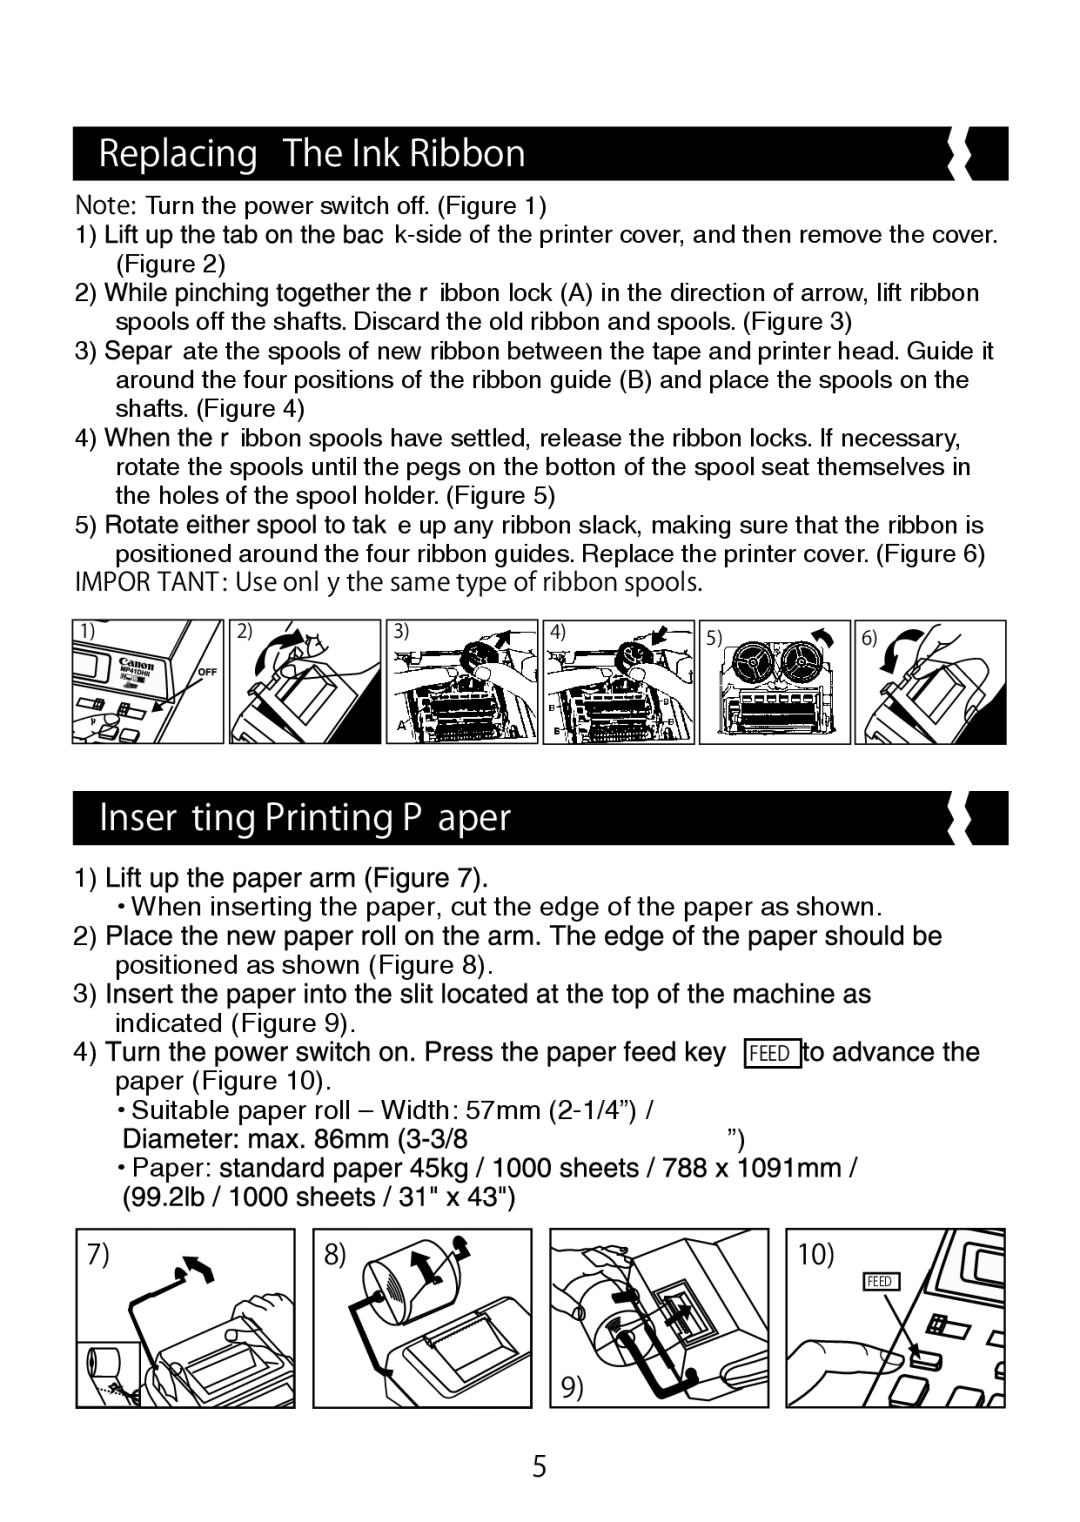 Canon MP41DHII manual Replacing The Ink Ribbon, Inser ting Printing P aper, positioned as shown Figure, indicated Figure 